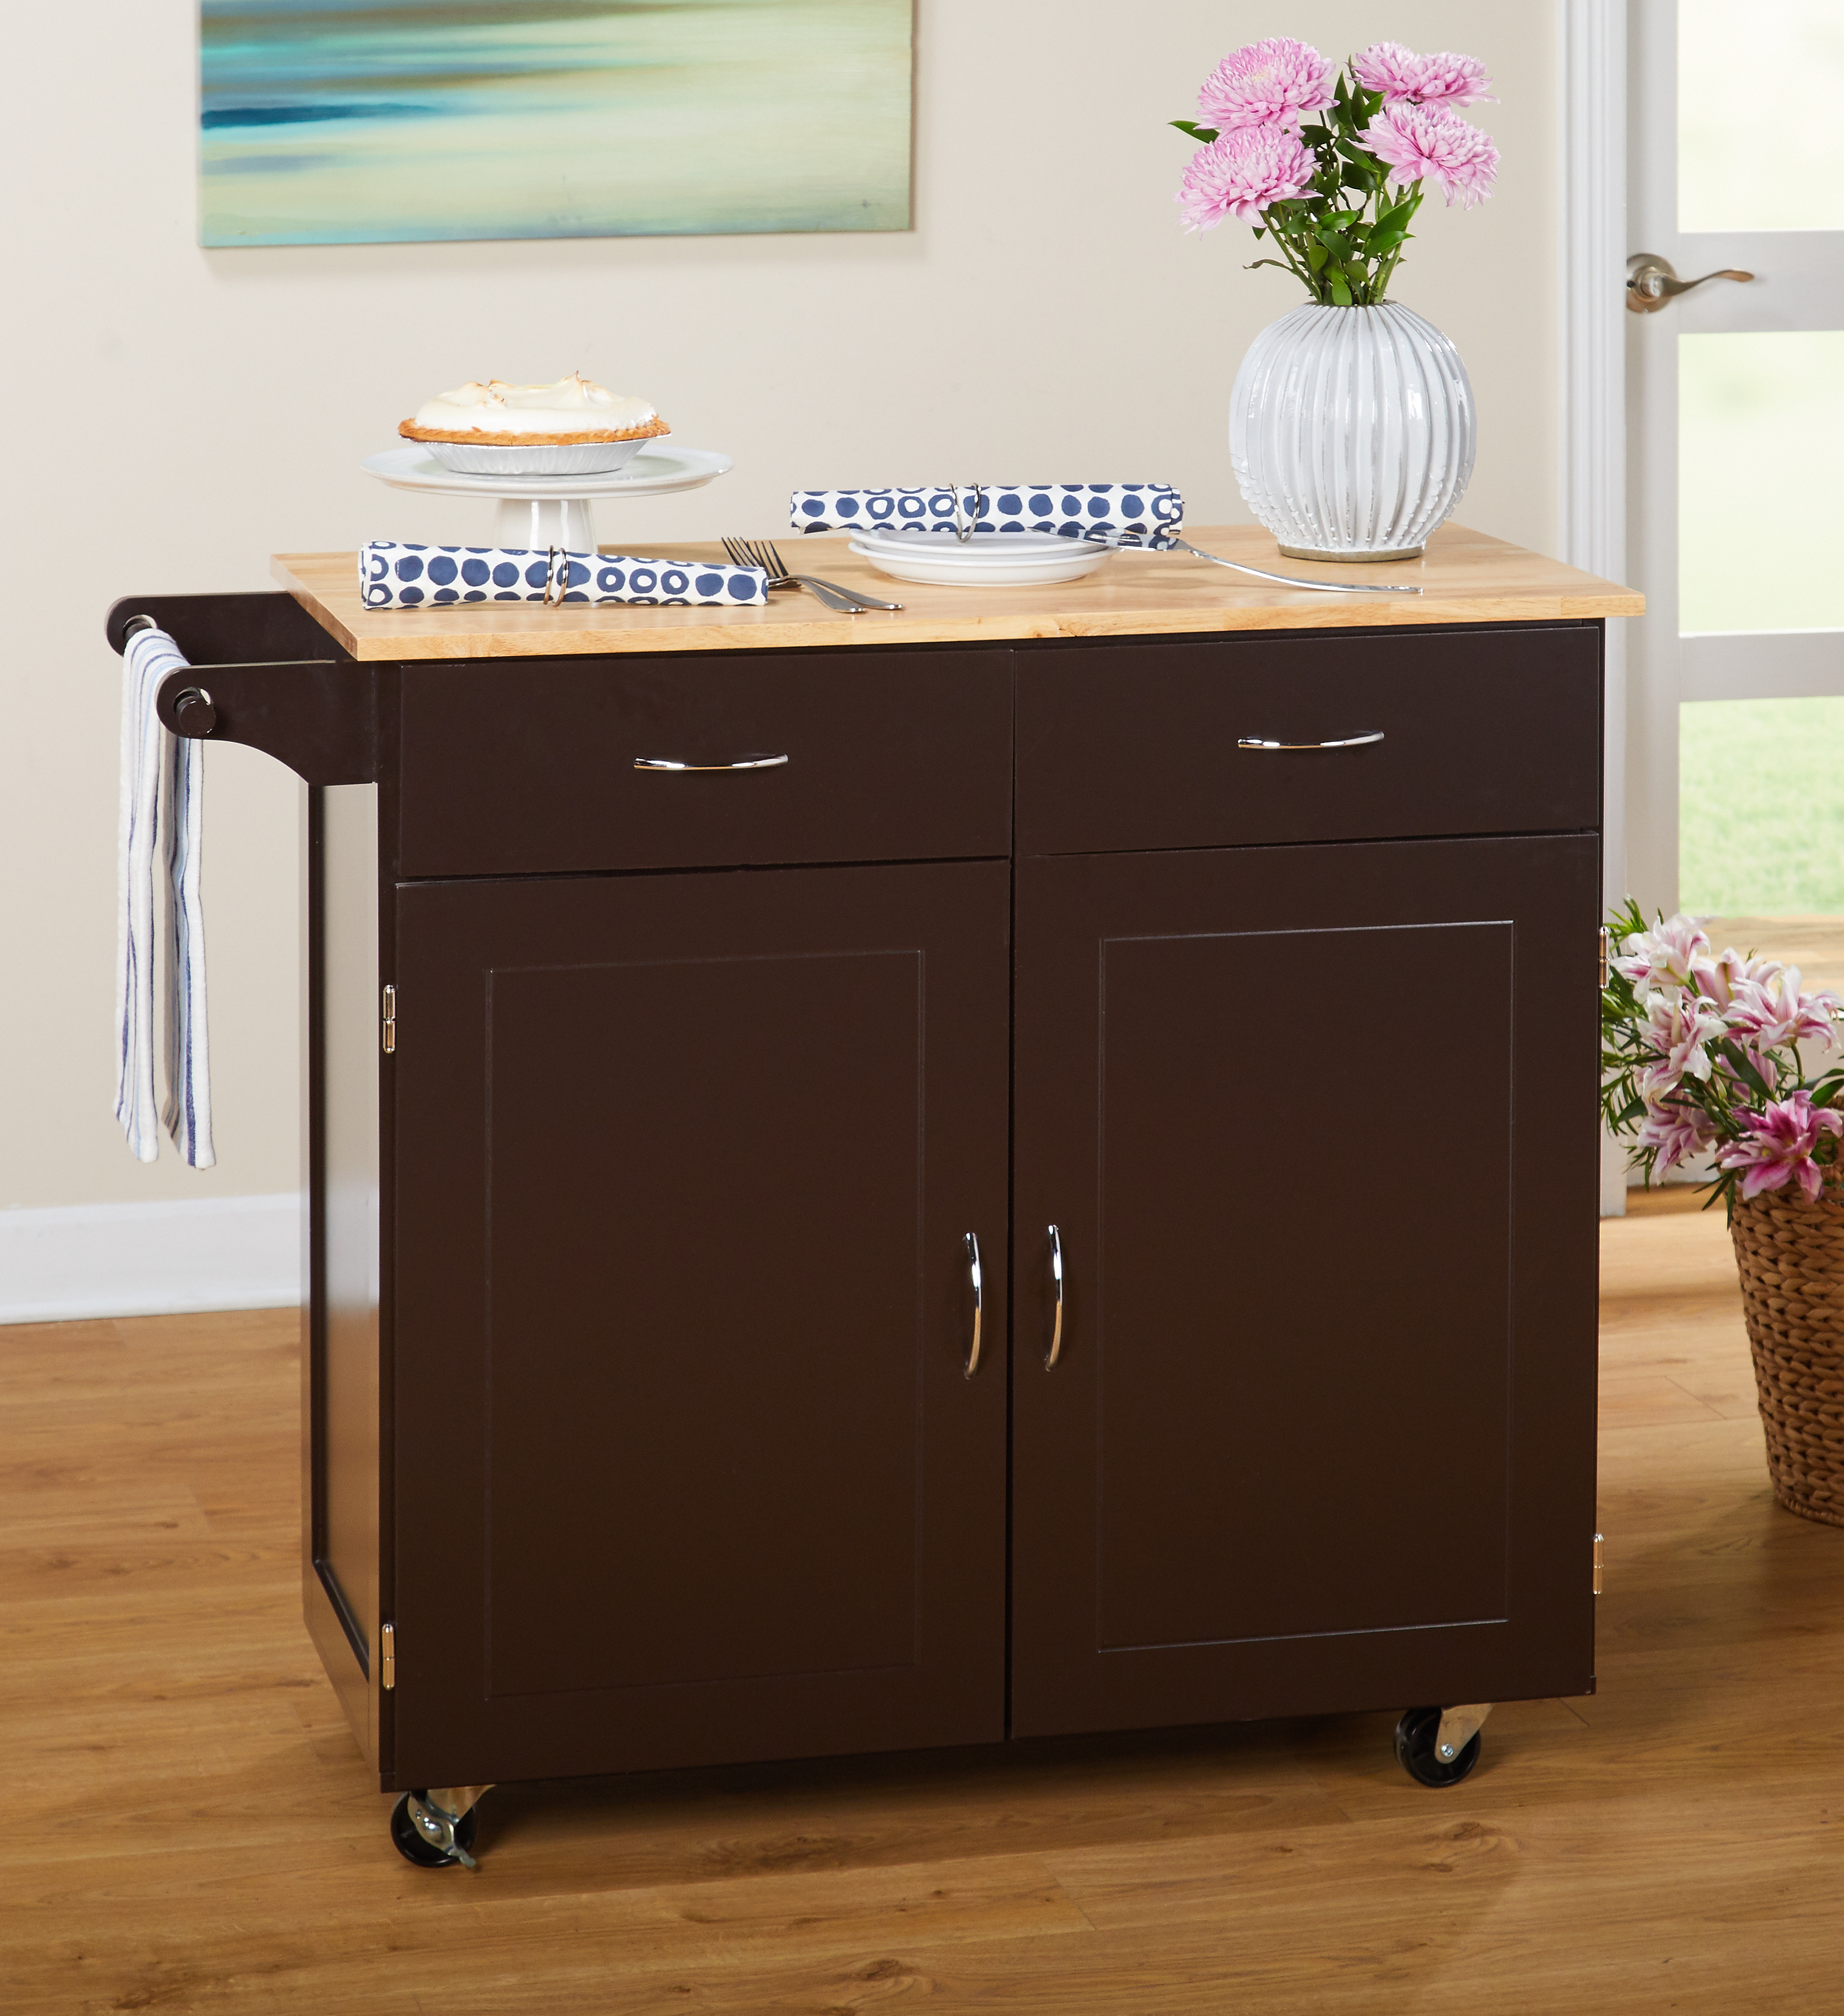 TMS Large Kitchen Cart with Rubber wood Top, Espresso - image 1 of 5